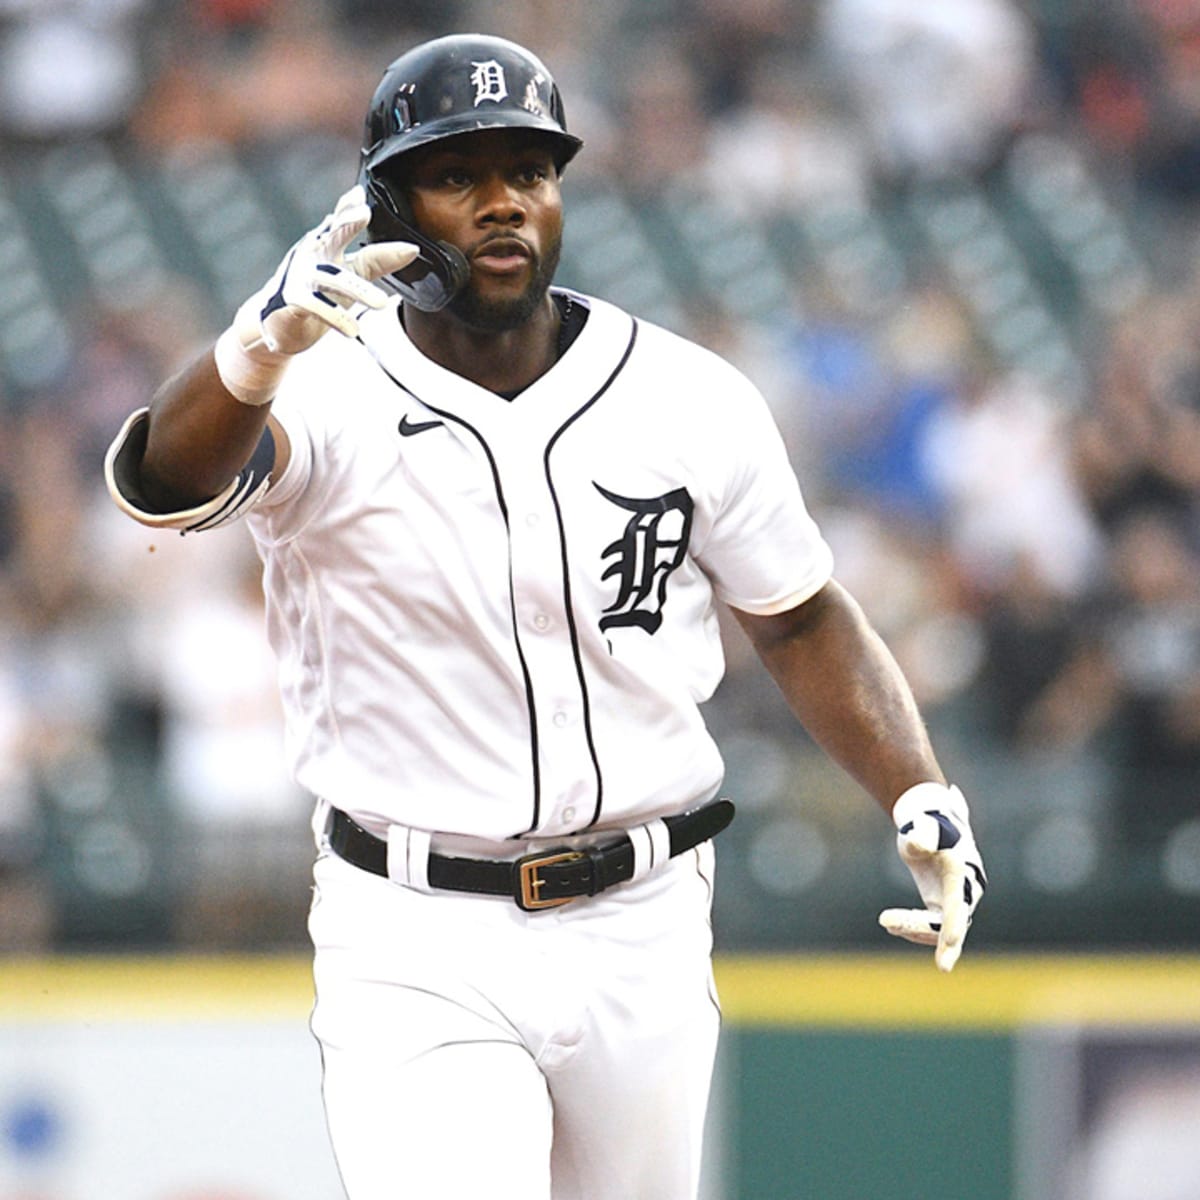 Detroit Tigers: Akil Baddoo is in the race for AL Rookie of the Year